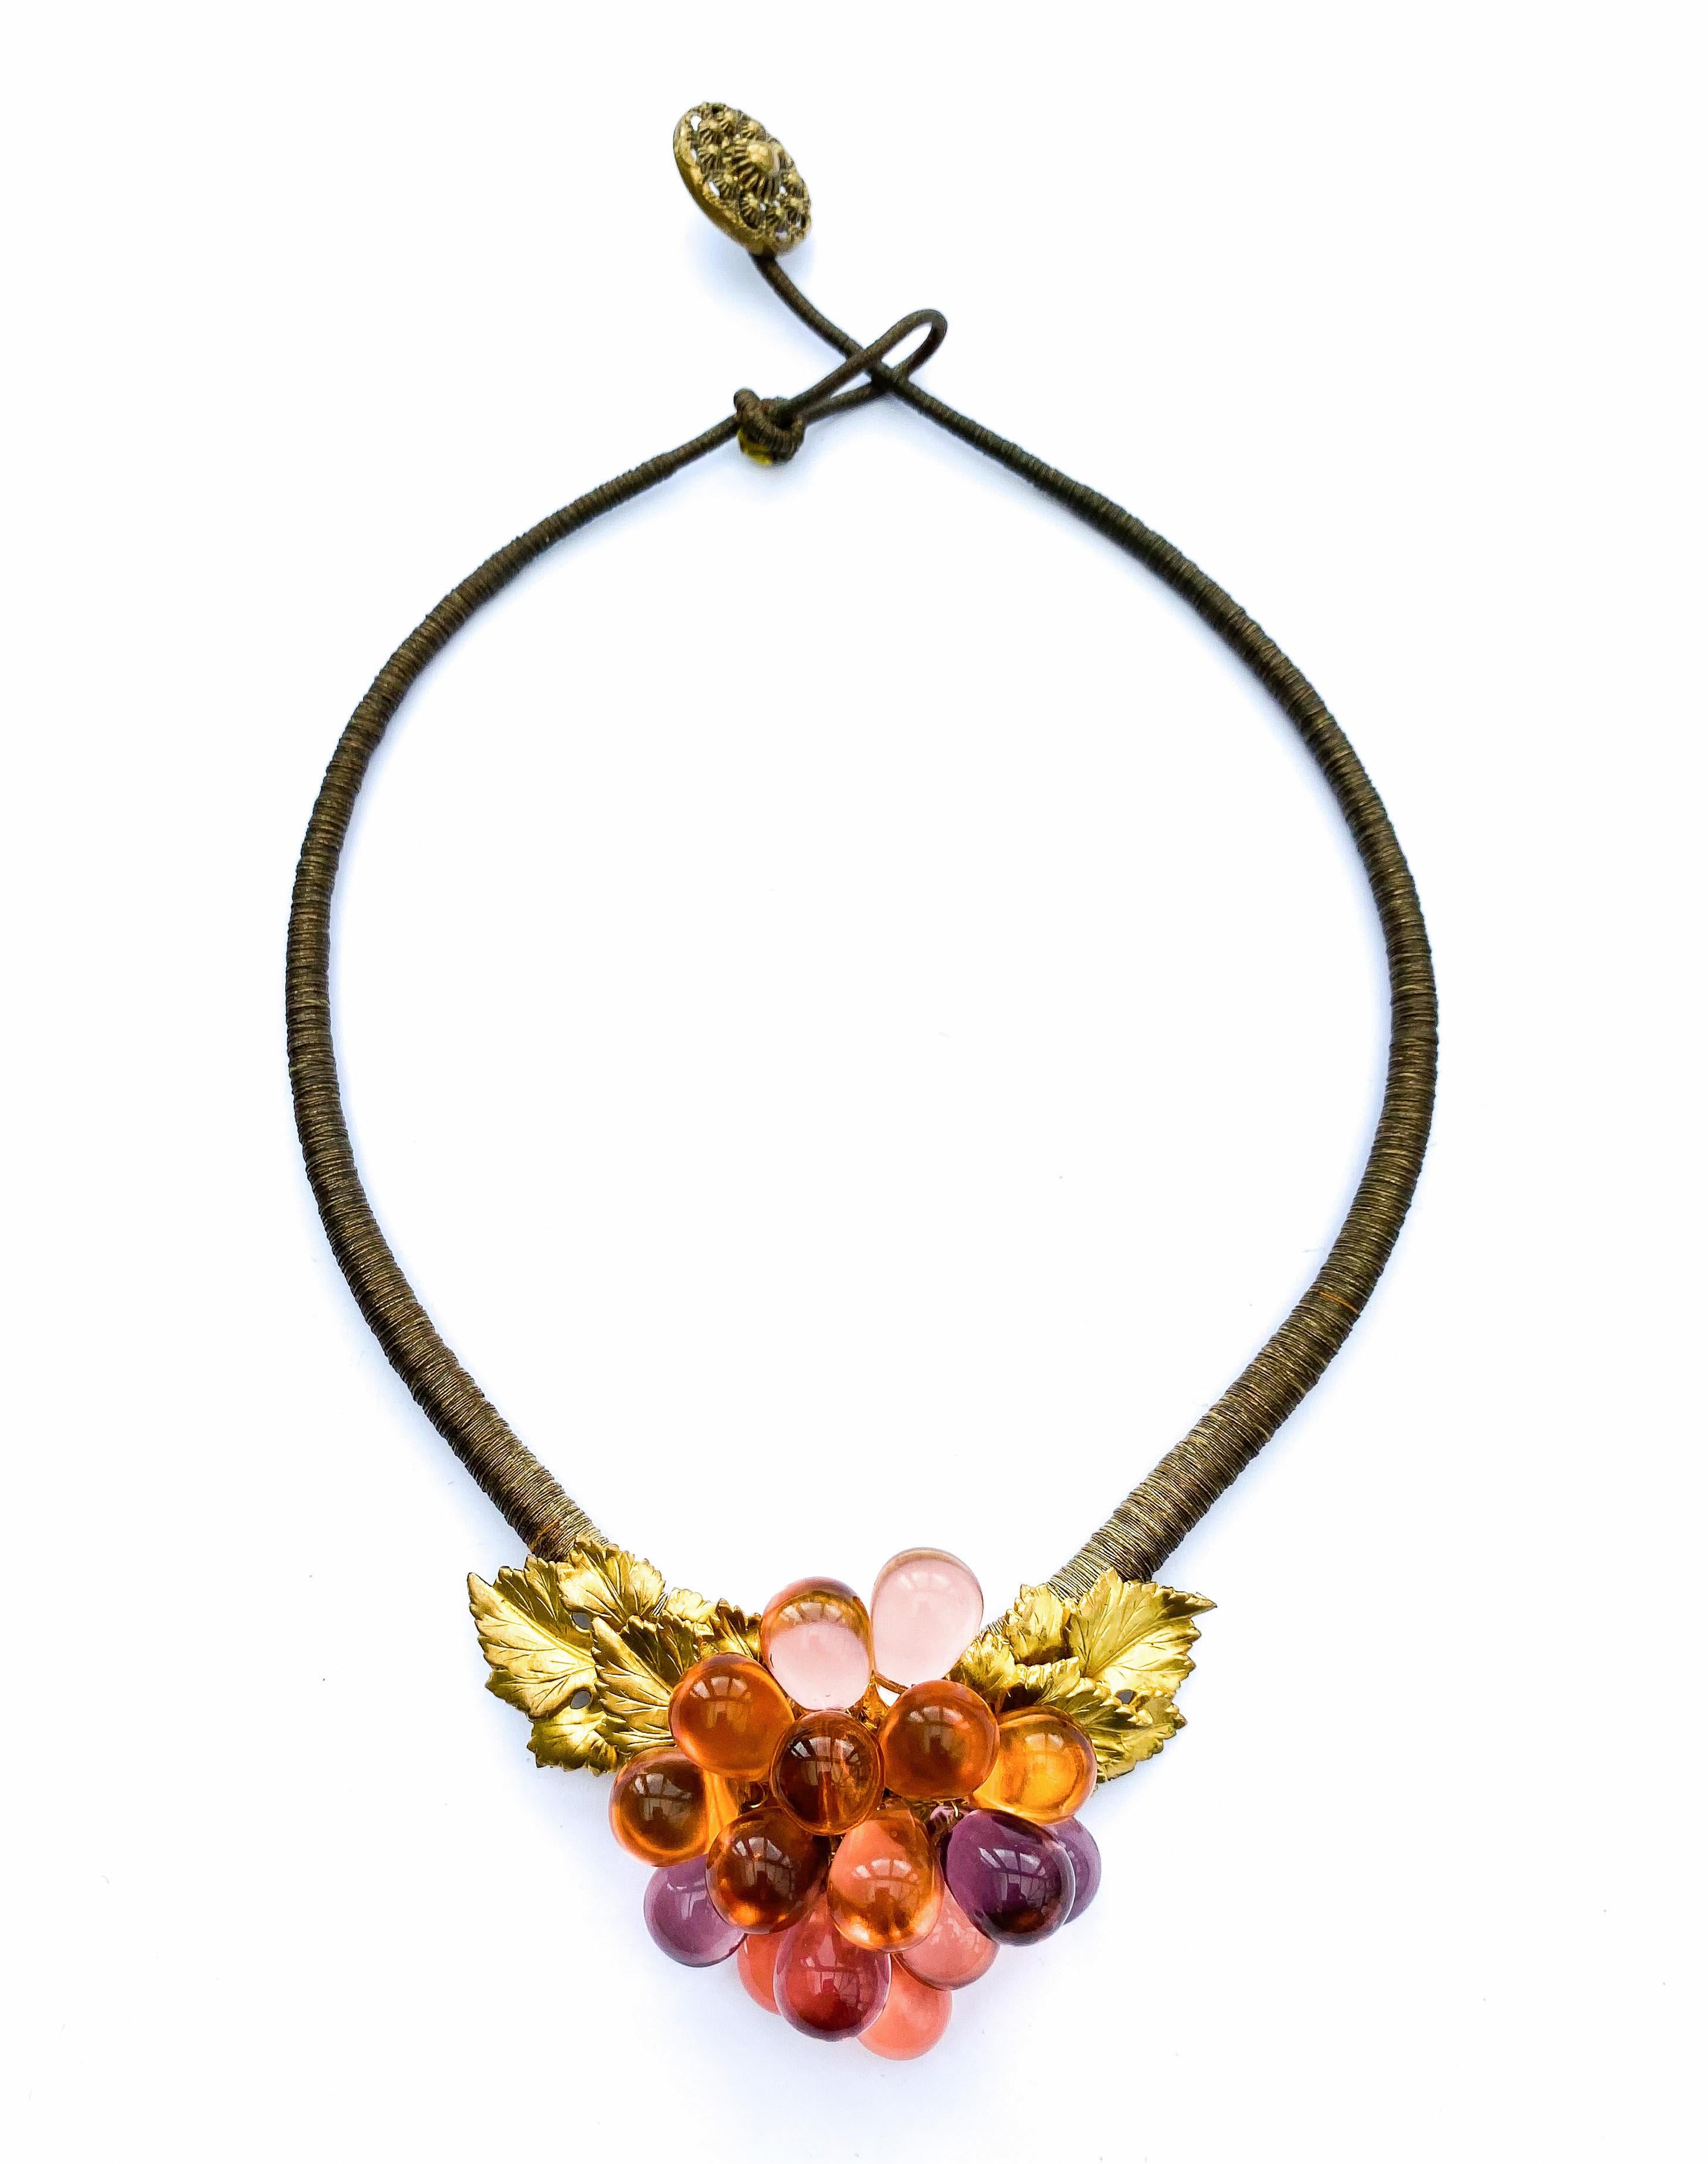 A highly unusual pendant necklace, from the 1920s, with a soft, subtle colour way, a gentle gilding mixed with transparent peach glass 'grapes', luminescent and eye catching - all mounted on a graduated necklace that is 'bound' in faded gilt bullion